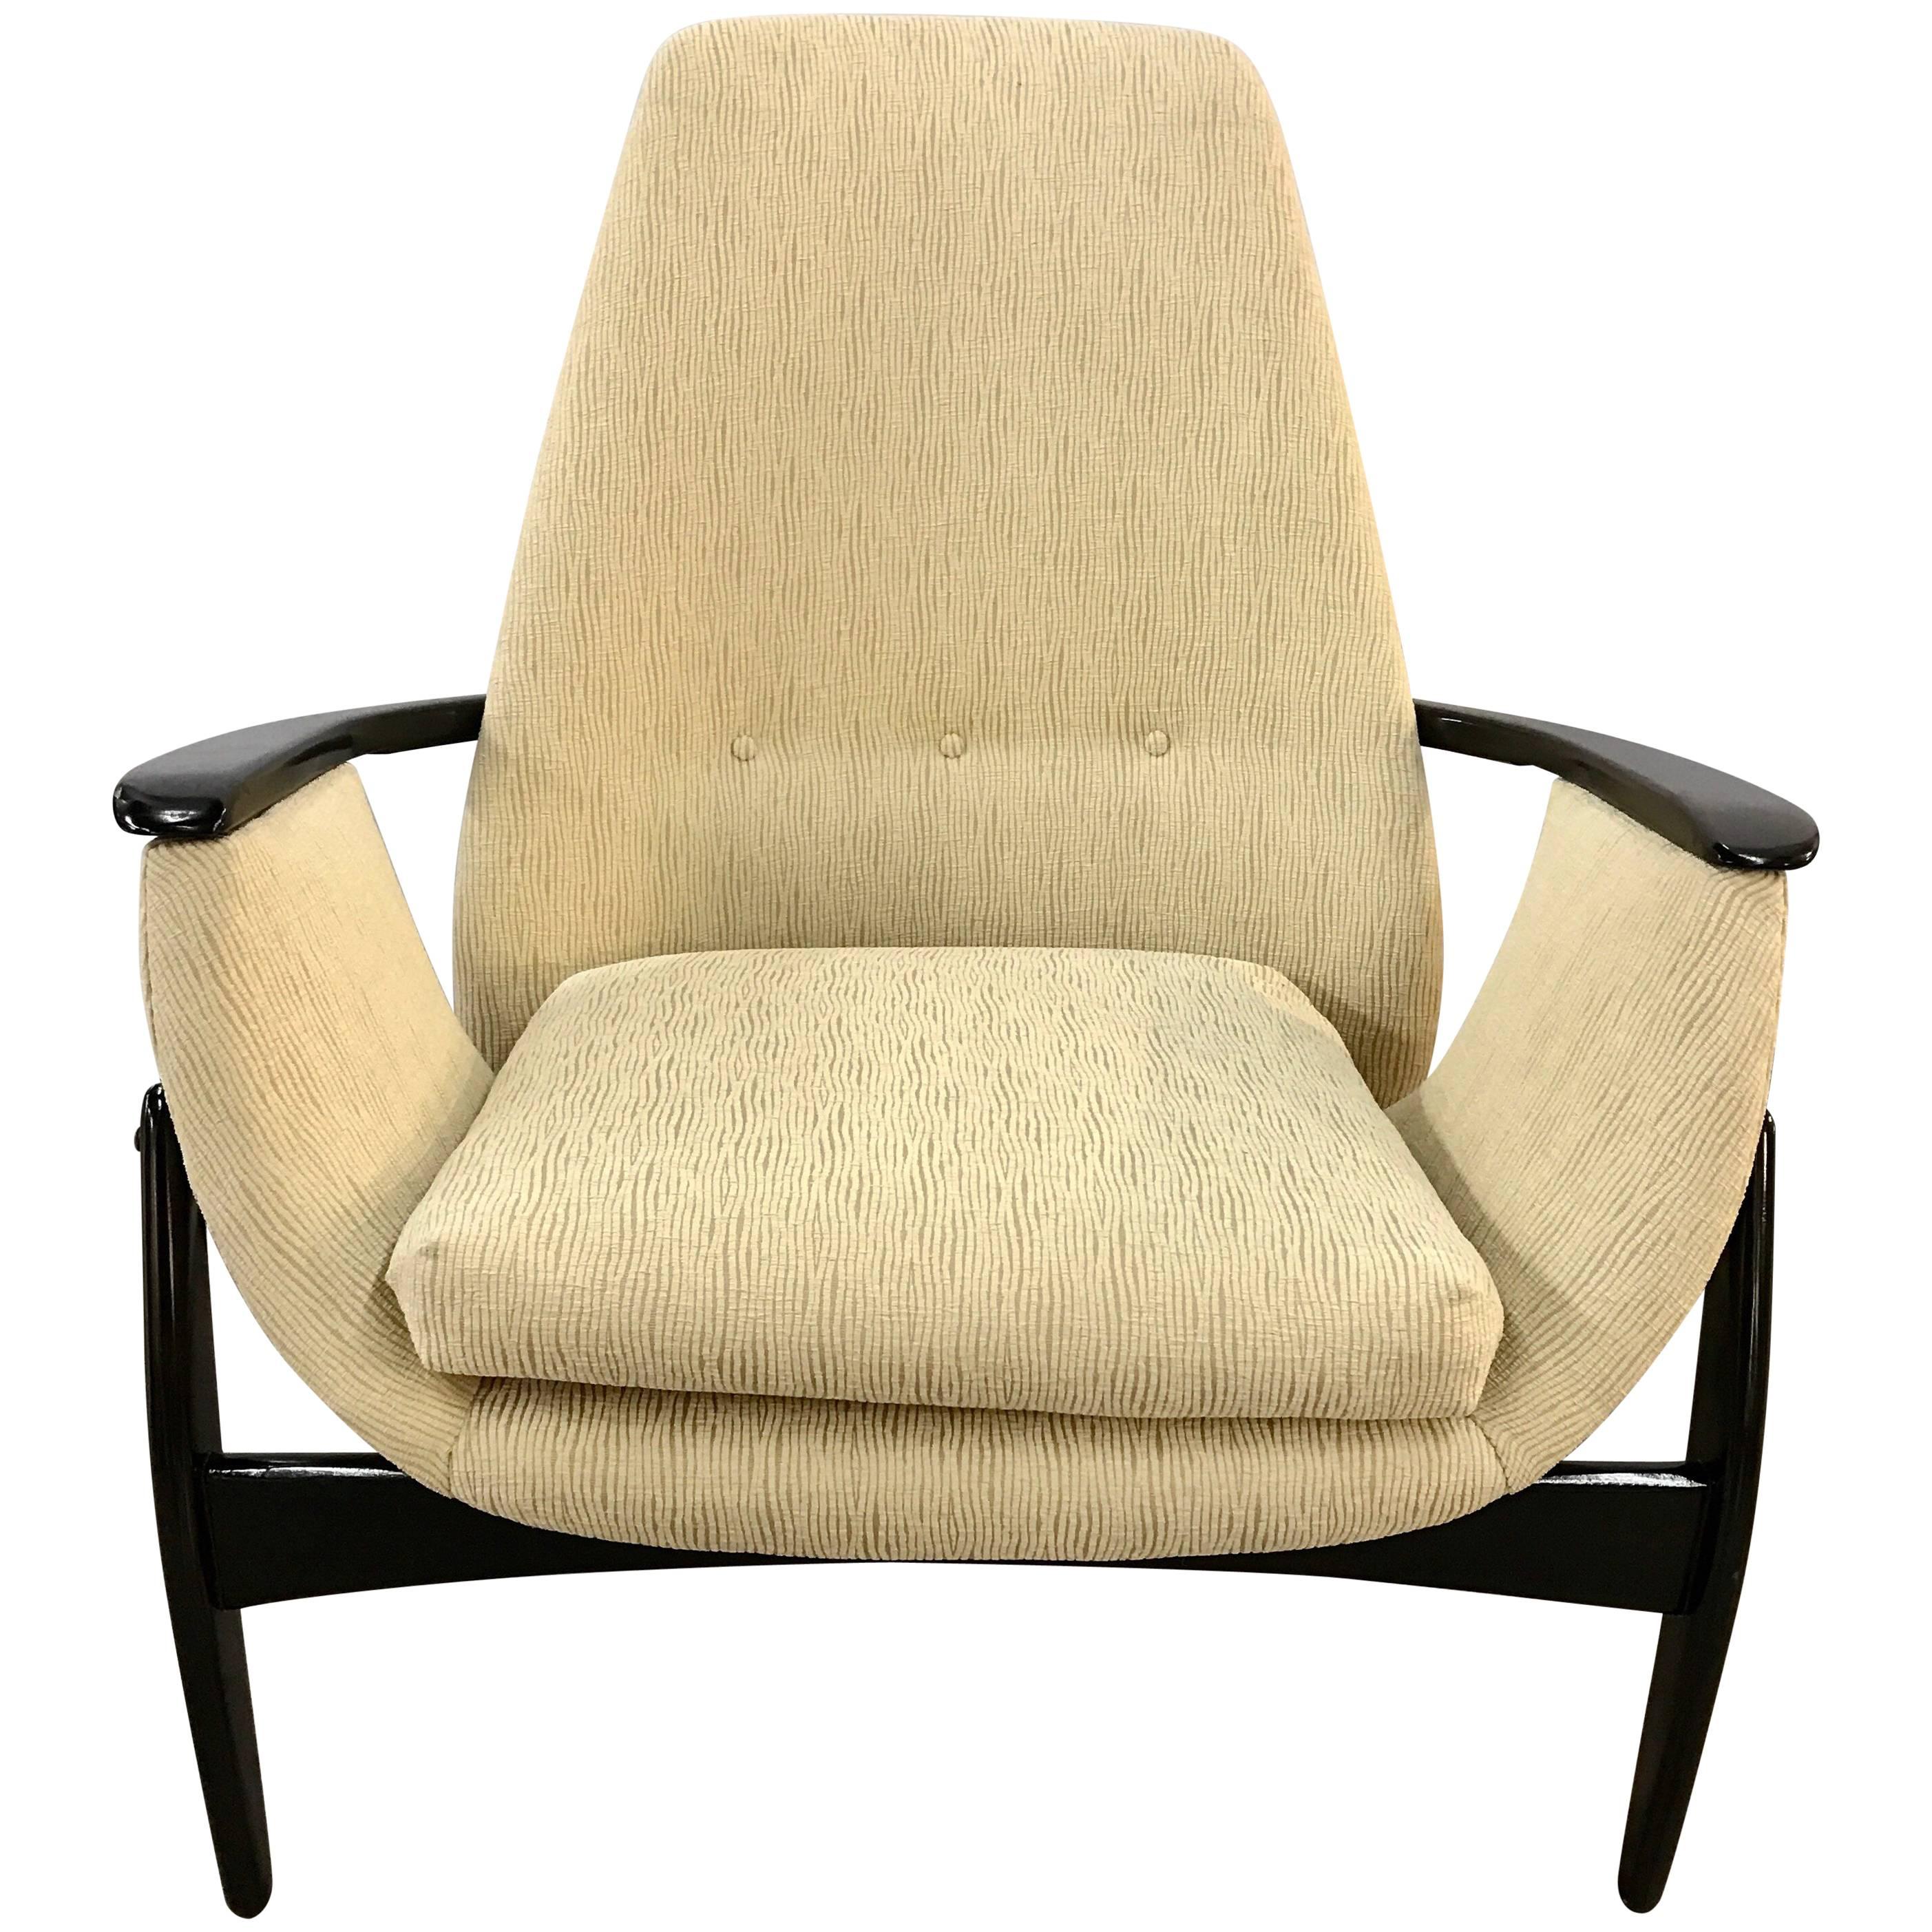 Belgian Mid-Century Modern Tri-Pod Chair Attributed to Alfred Hendrickx